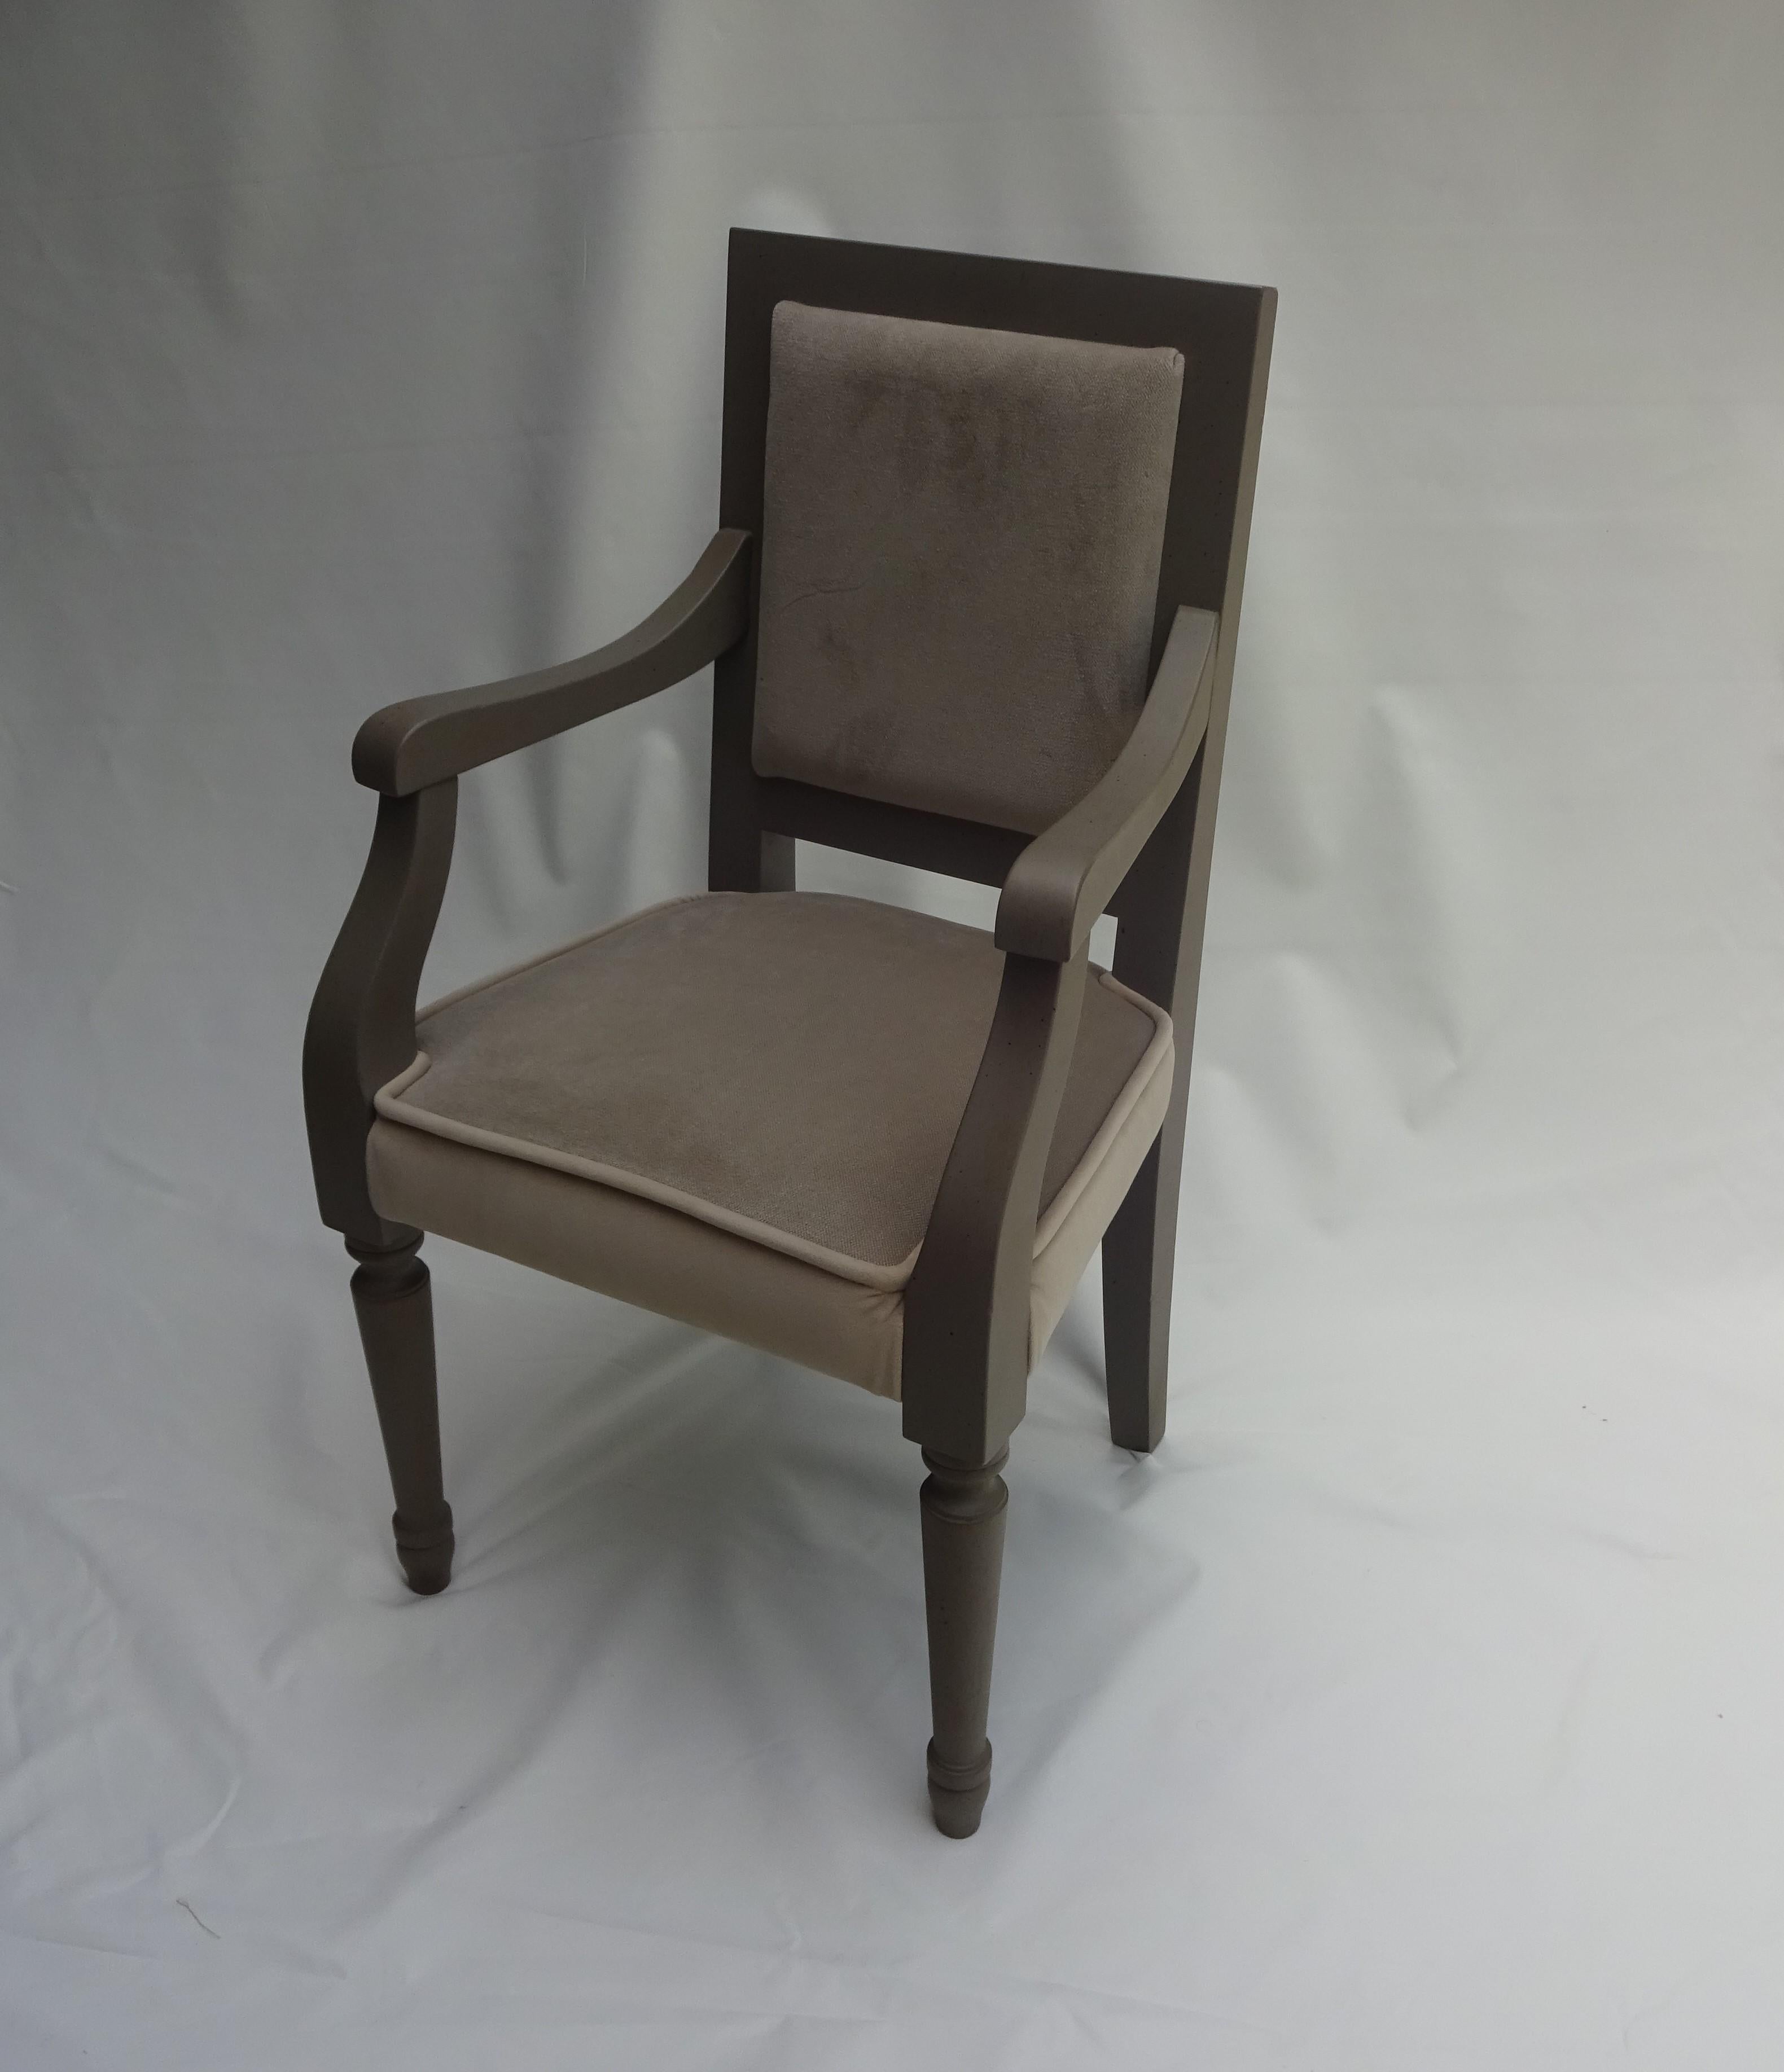 Child armchair - exclusive model - made in France by true Artisans in the traditional way with 